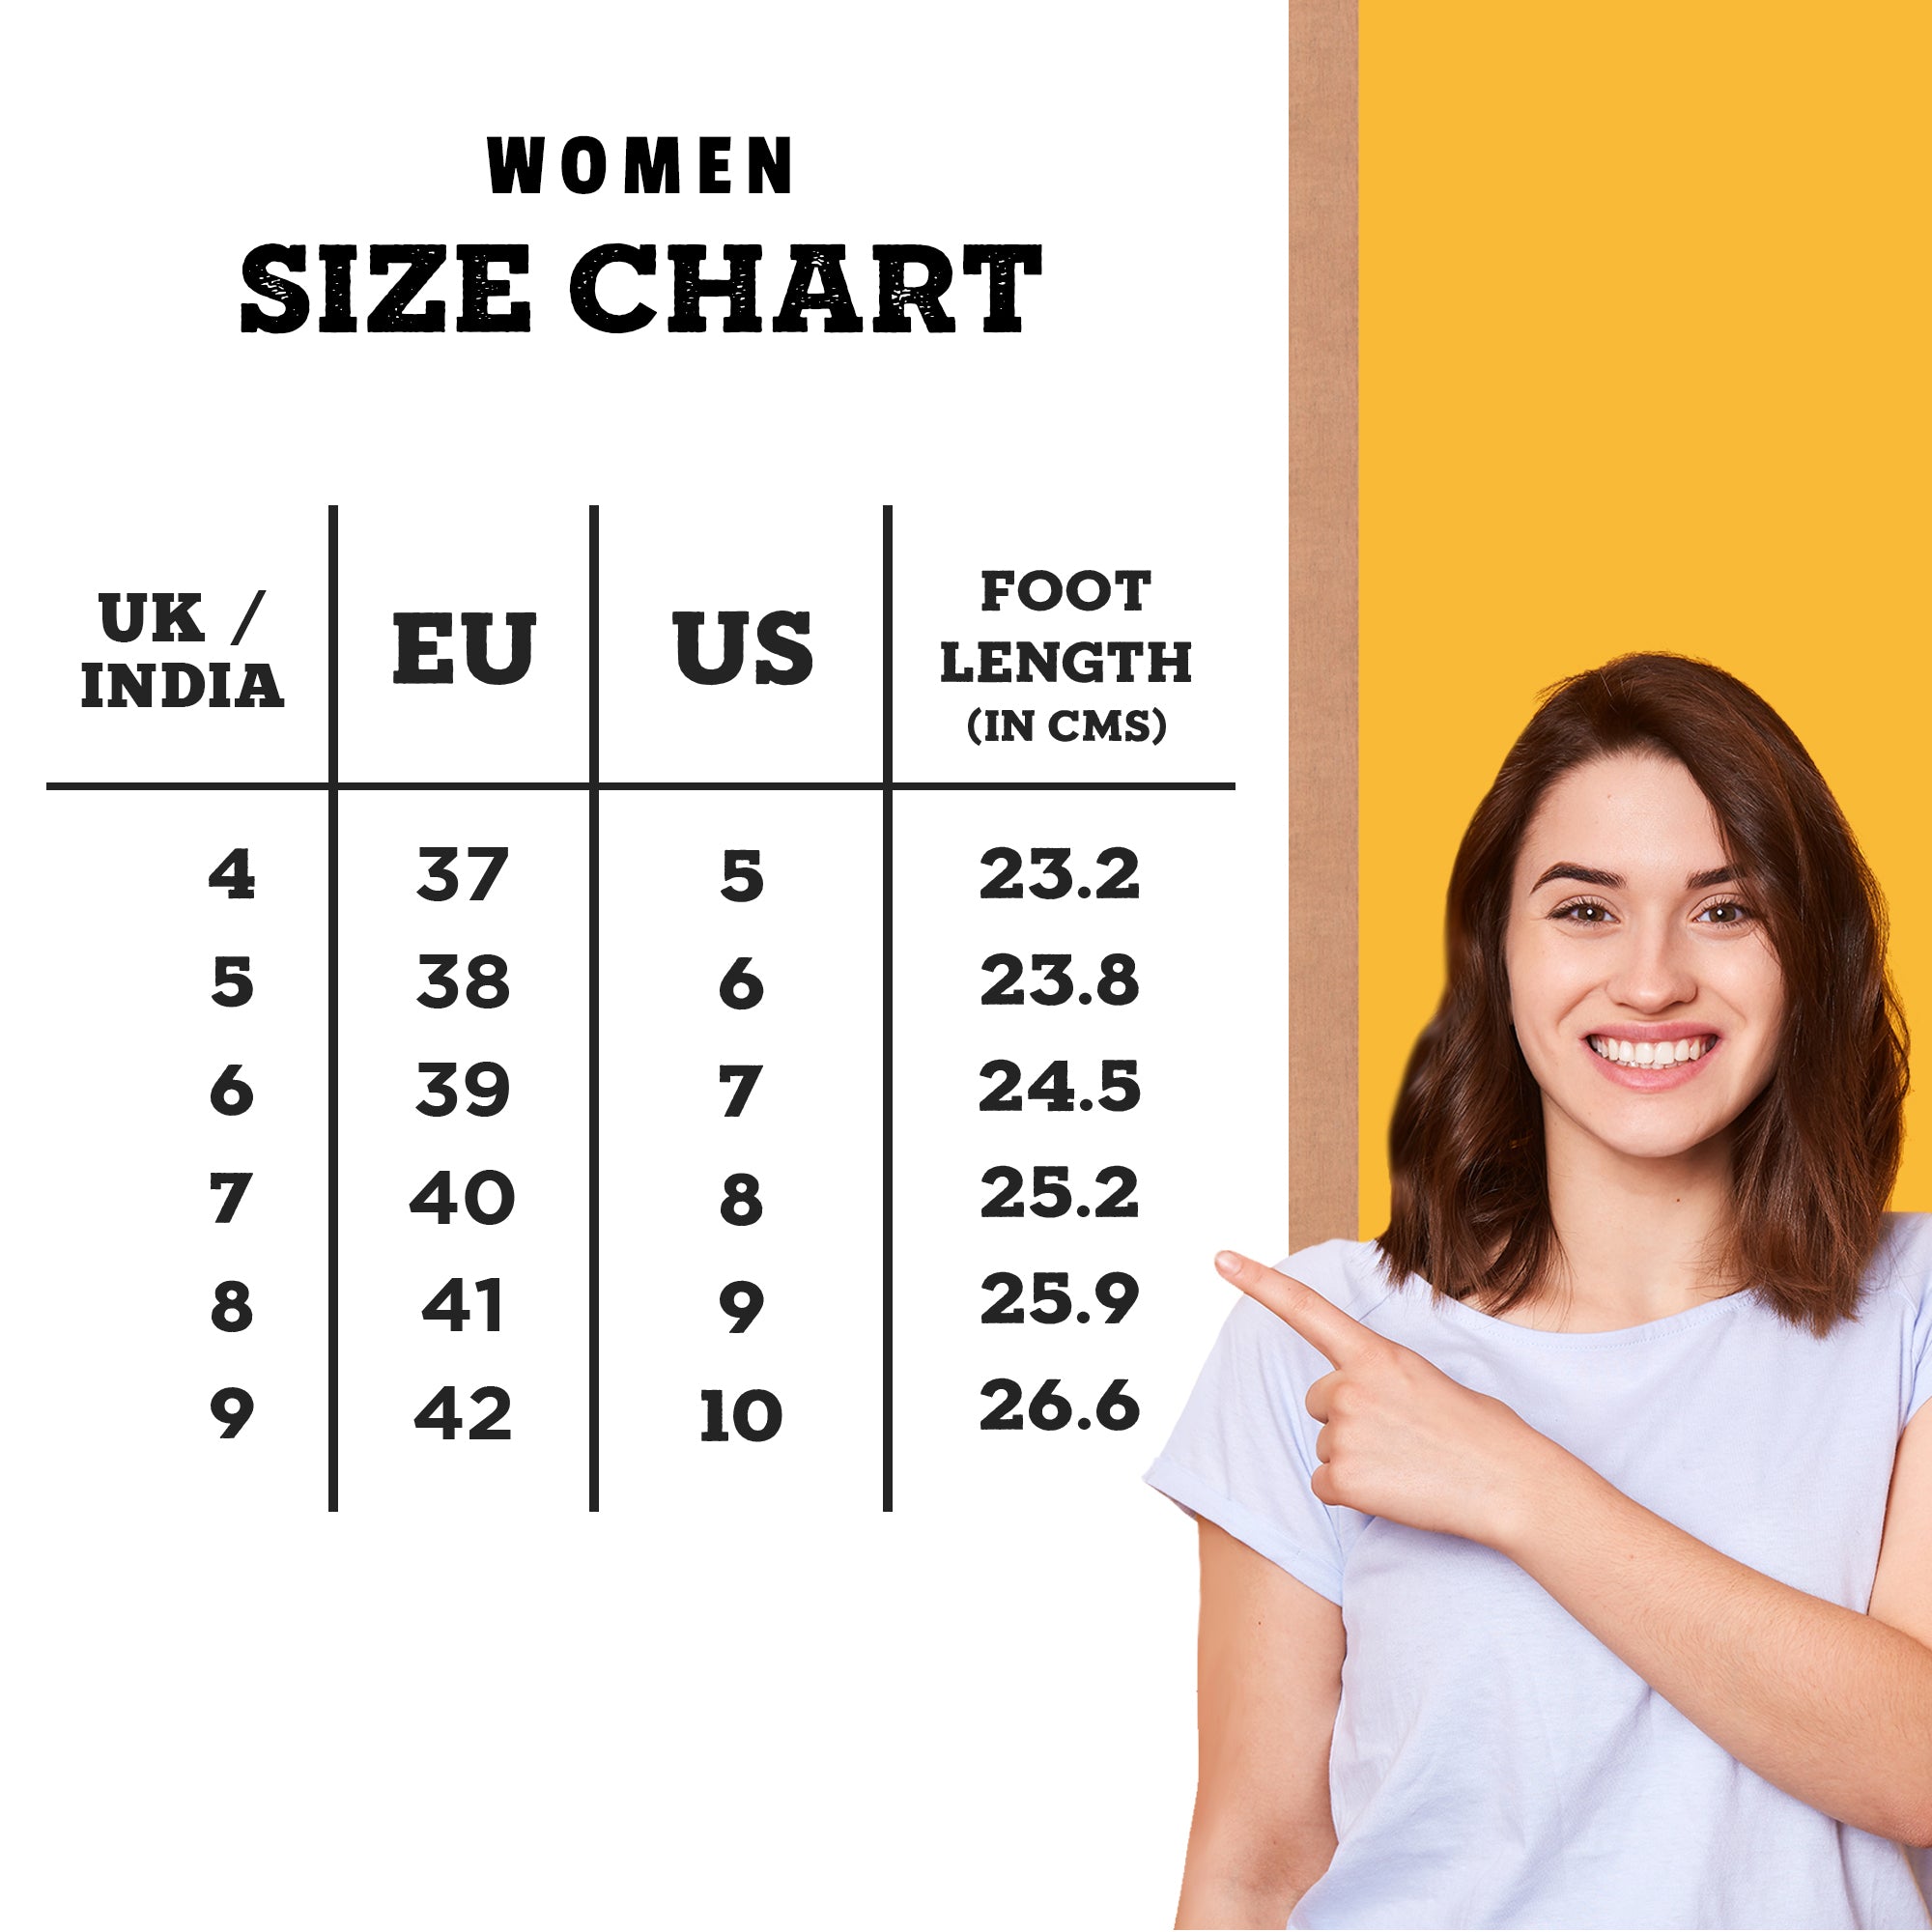 Know Your Size - Flip Flops Measurement Guide - Solethreads